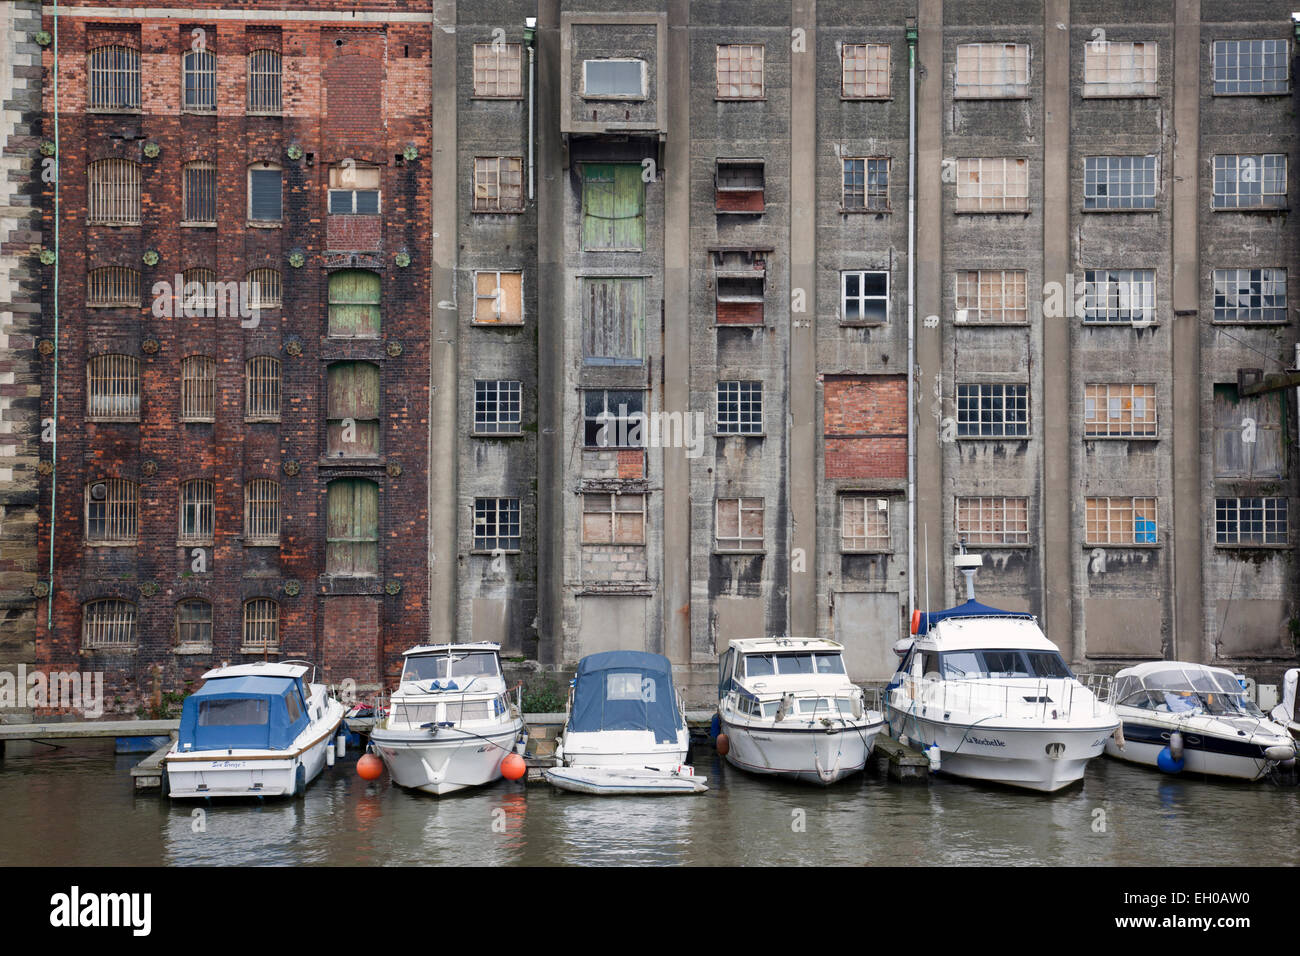 Old warehouses Bristol harbourside with small boats moored alongside,  Redcliffe Wharf, City of Bristol, England, UK Stock Photo